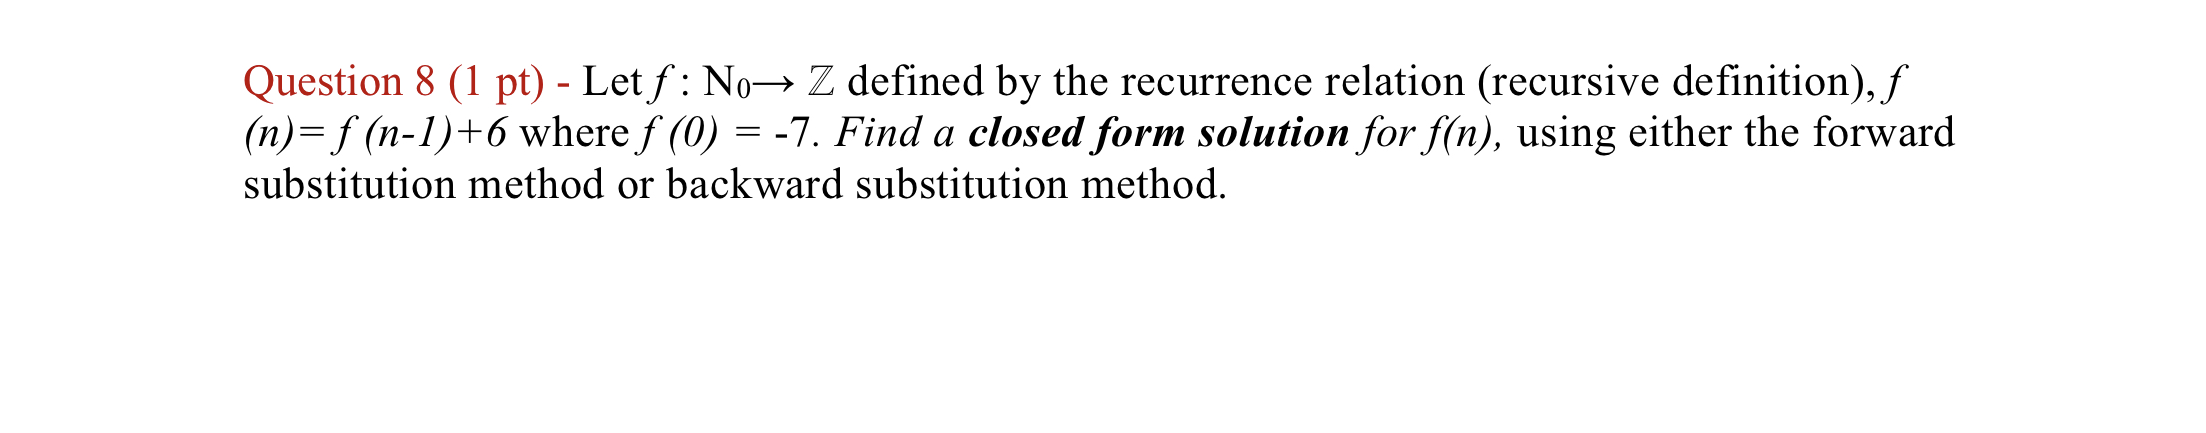 Question 8 (1 pt) - Let f: No Z defined by the recurrence relation (recursive definition), f (n)=f(n-1)+6